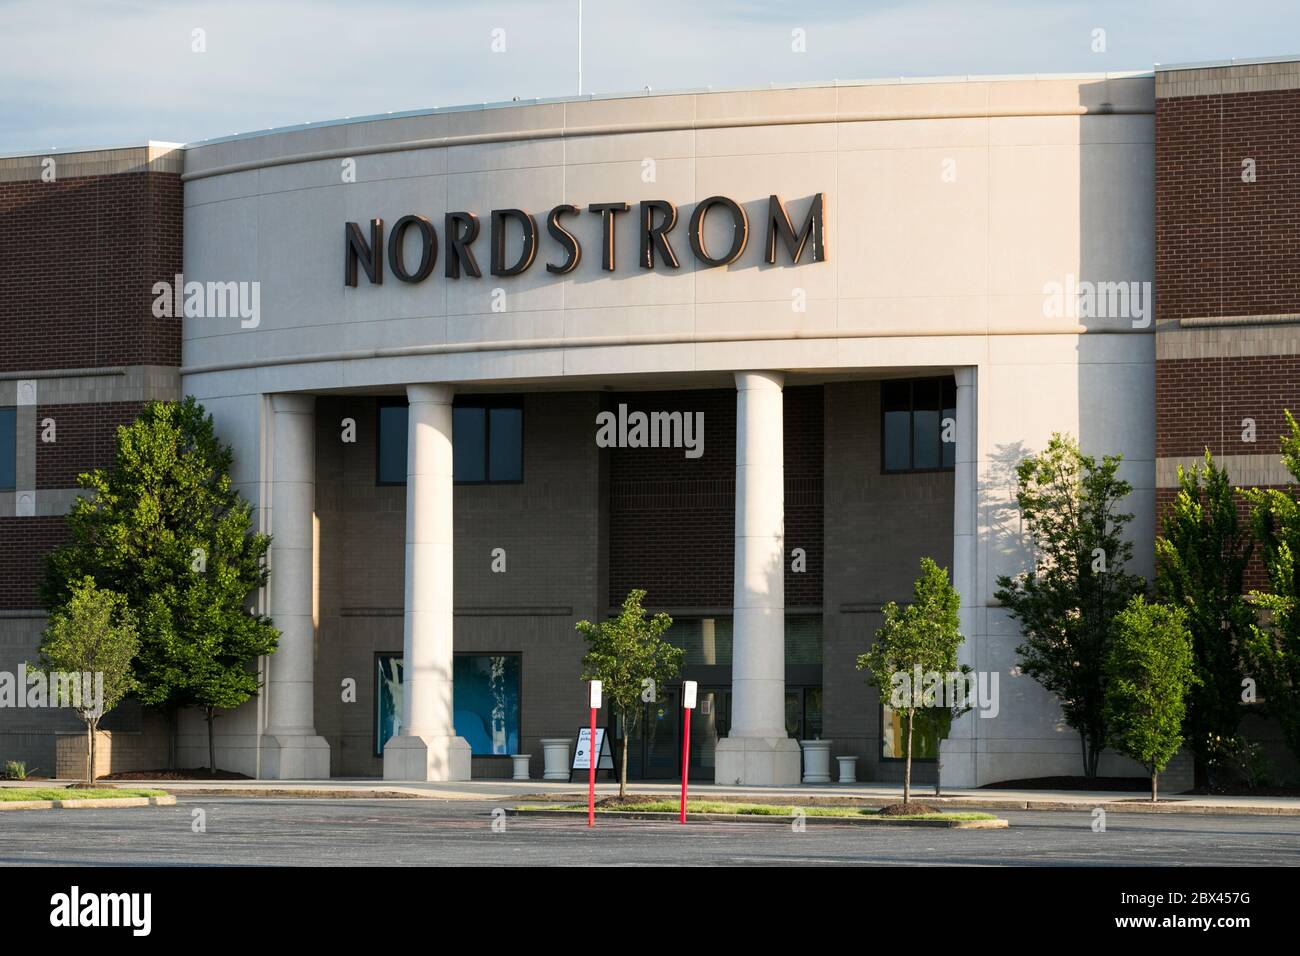 A logo sign outside of a Nordstrom retail store location in Annapolis, Maryland on May 25, 2020. Stock Photo